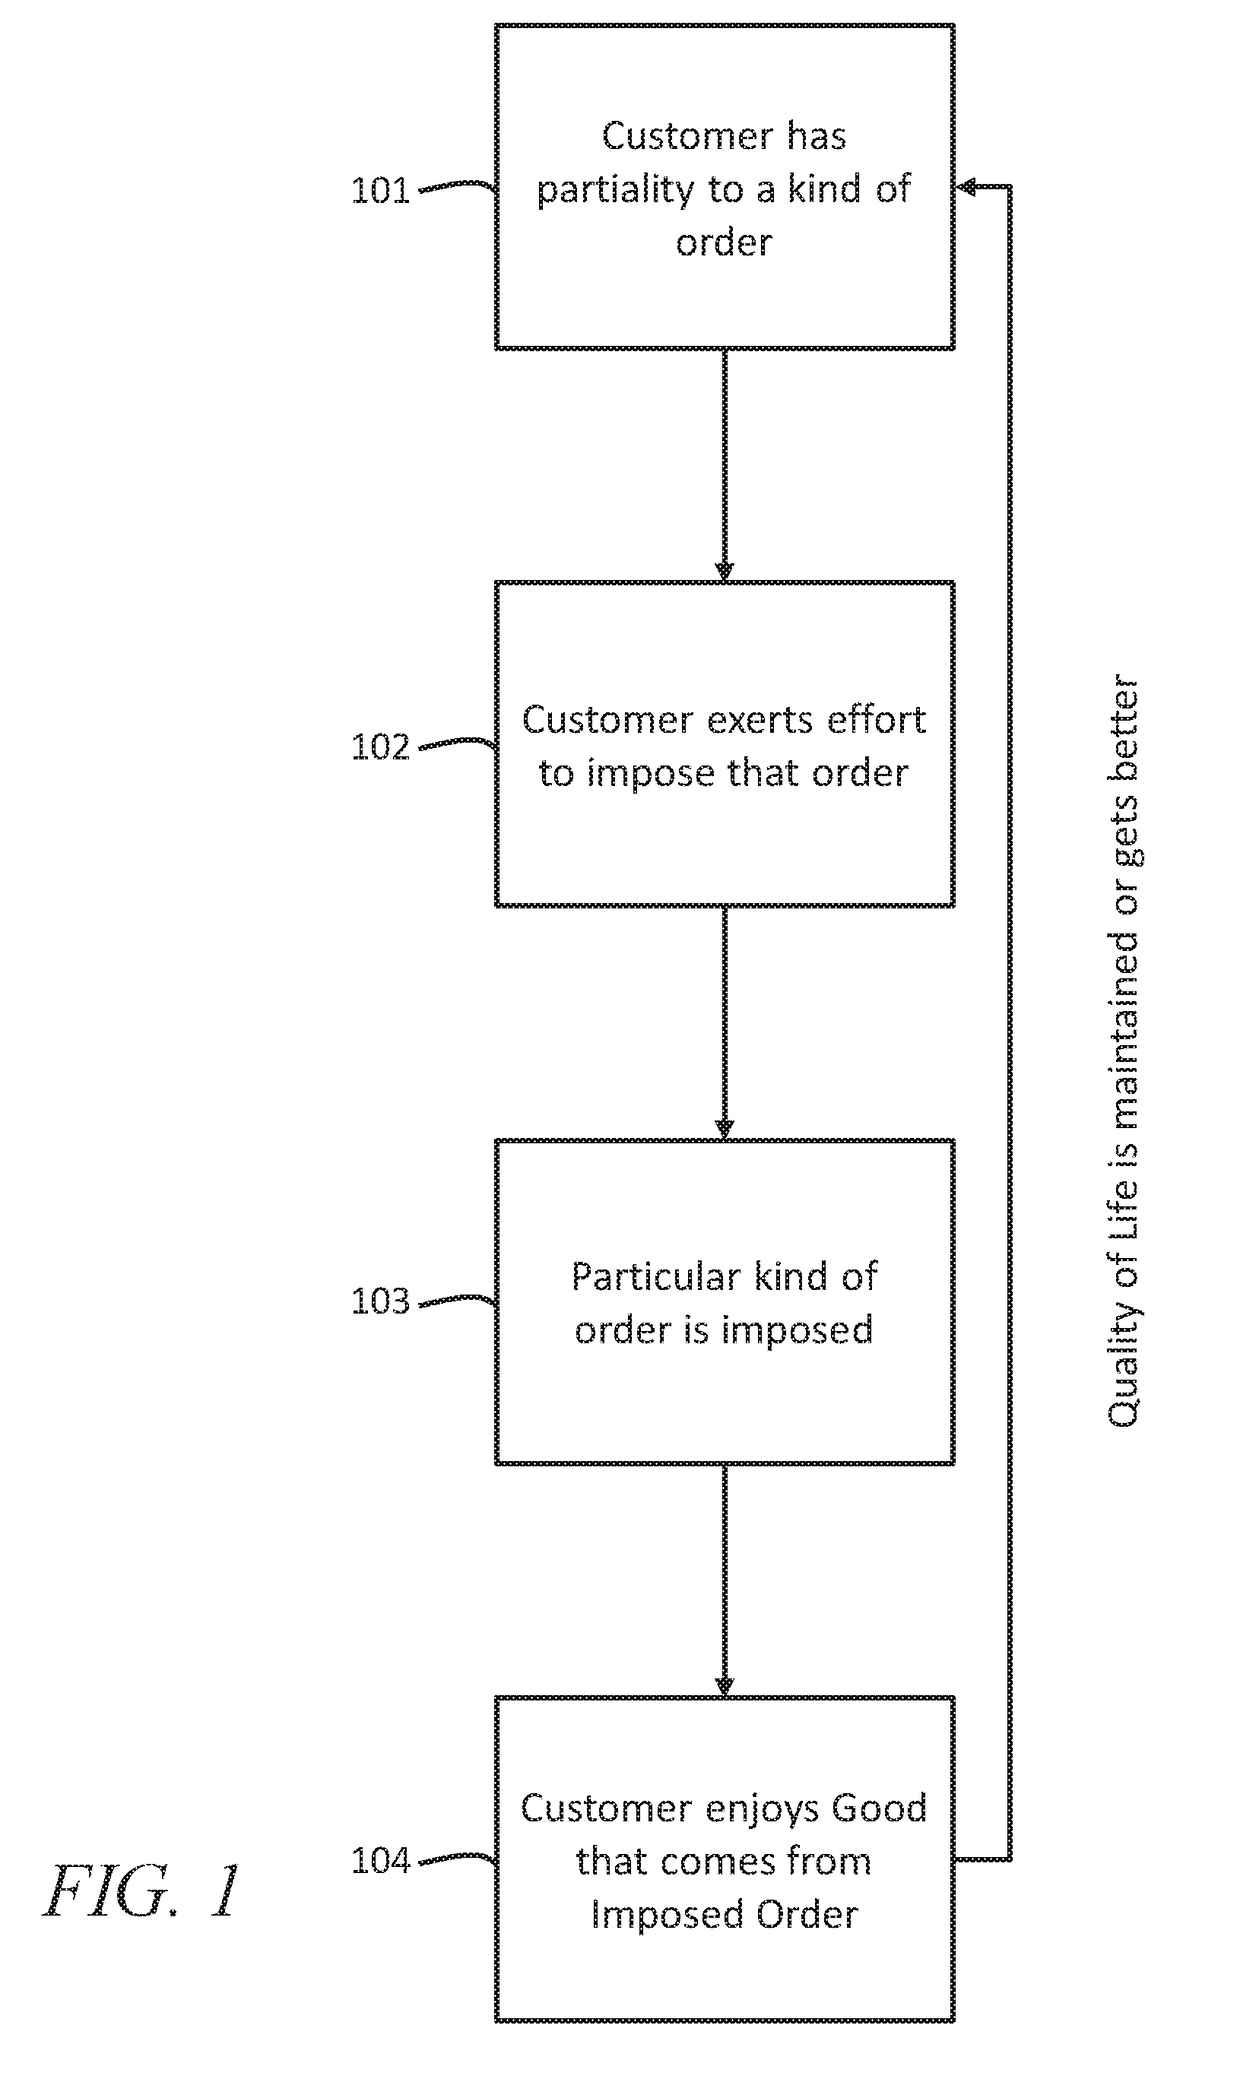 Vector-based characterizations of products and individuals with respect to customer service agent assistance